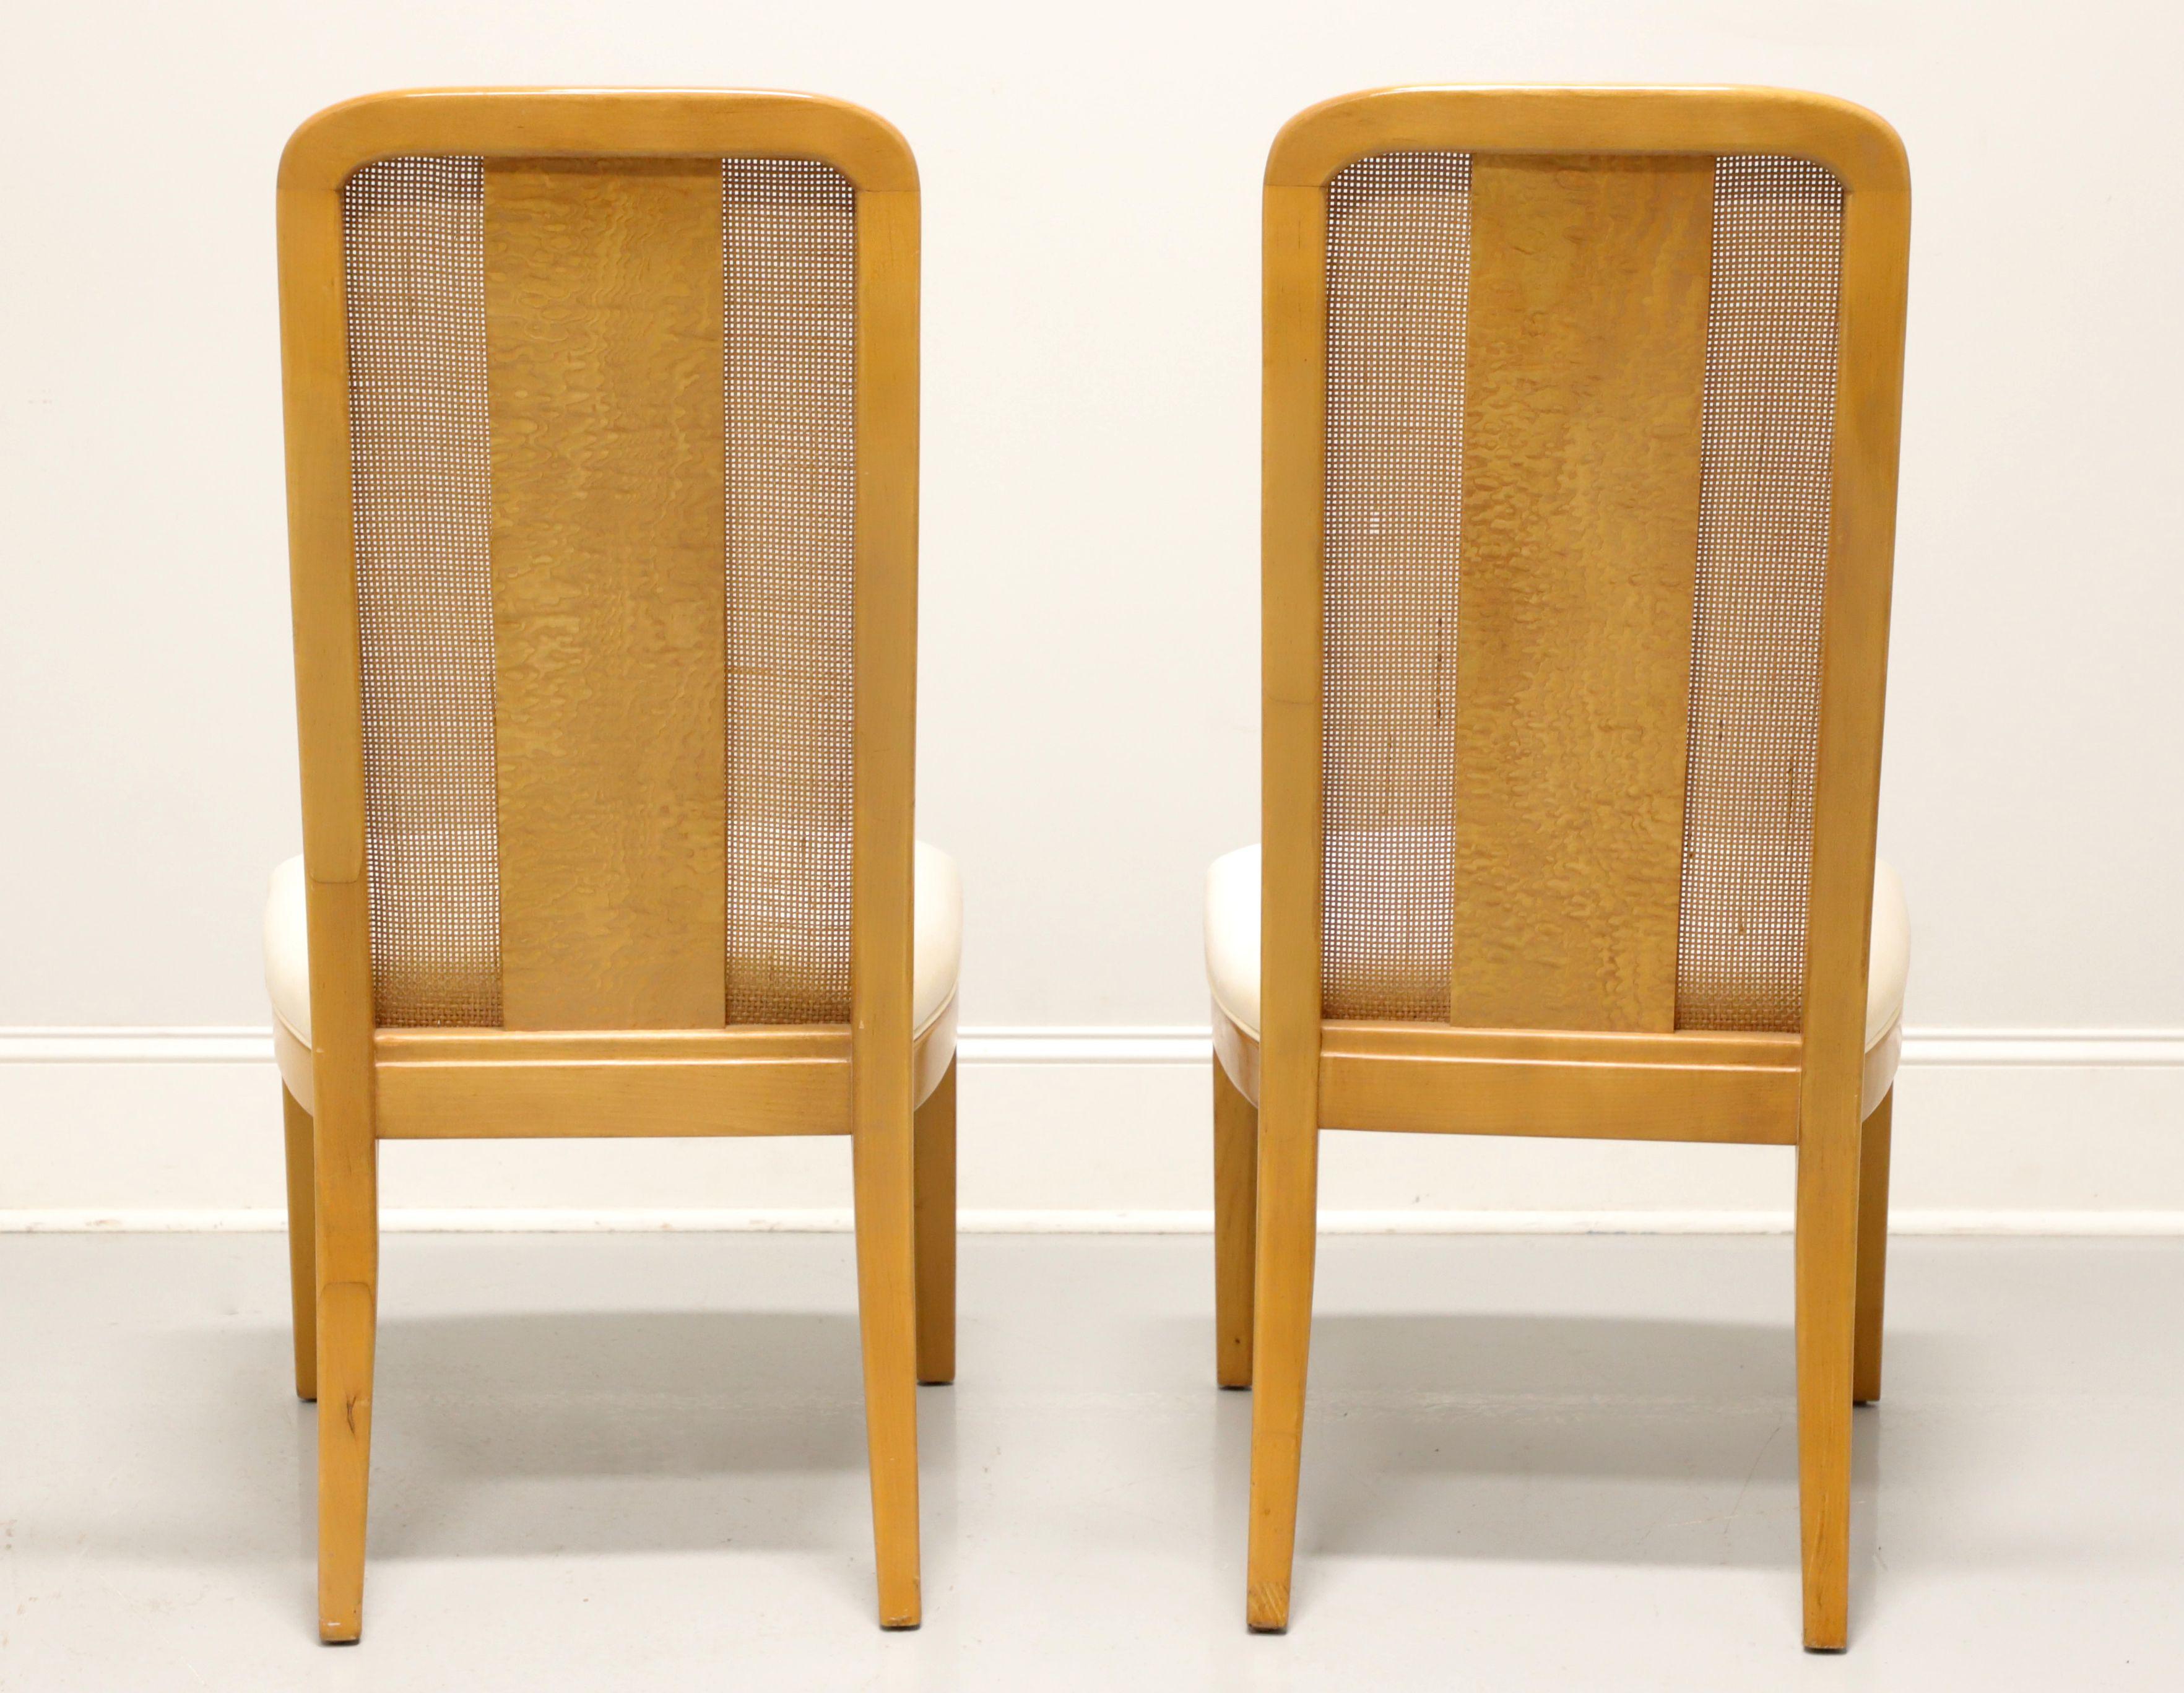 BERNHARDT Caned Burl Maple Contemporary Dining Side Chair - Pair B In Good Condition For Sale In Charlotte, NC